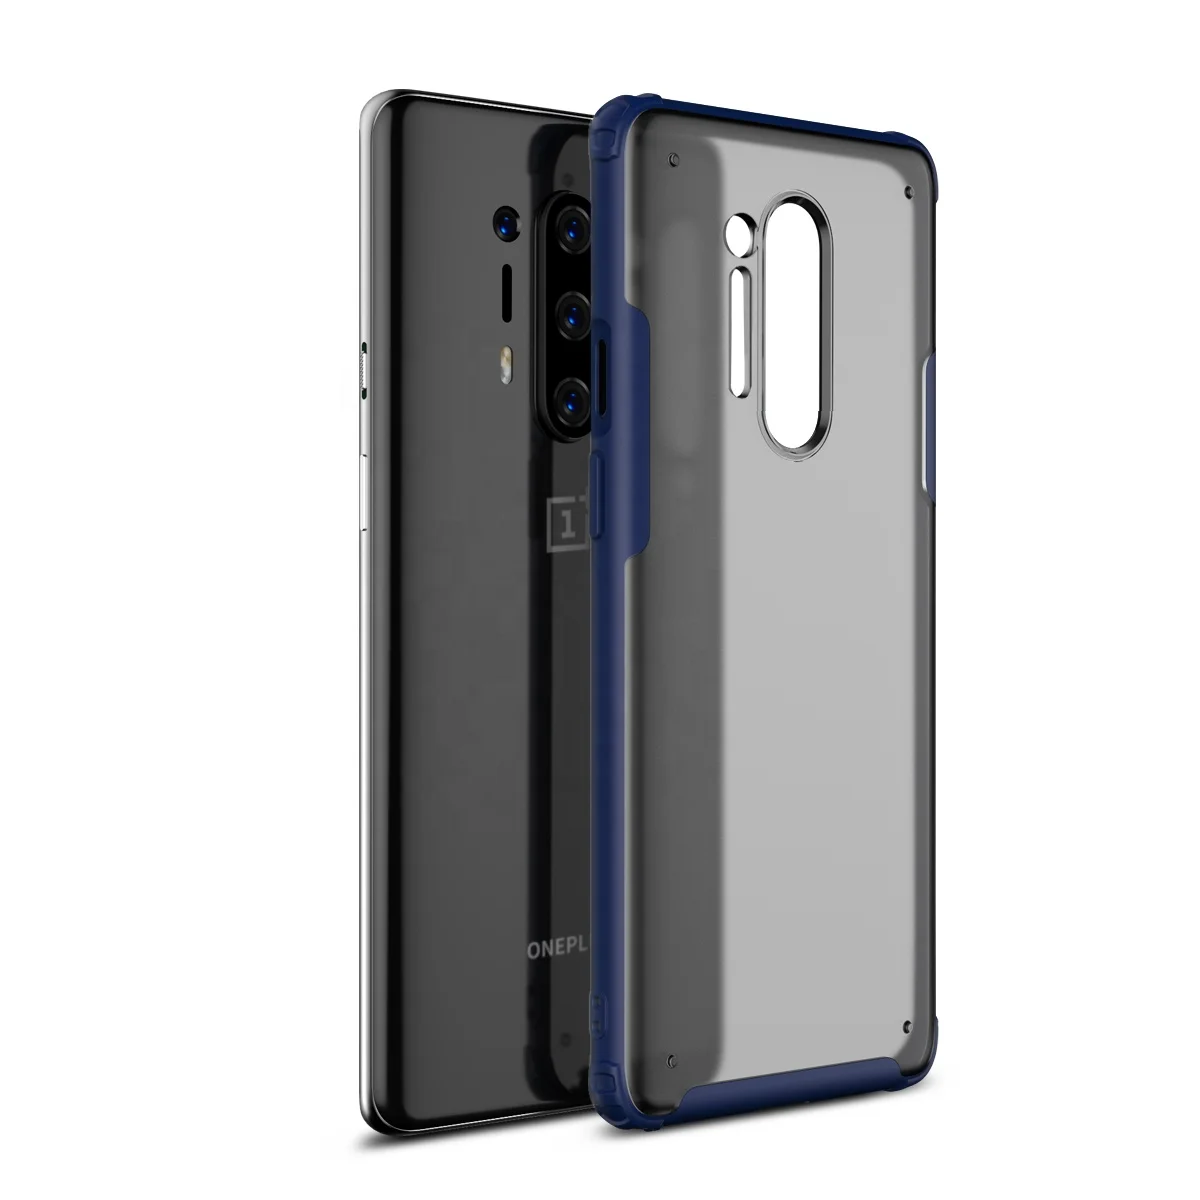 

Transparent Matte Shockproof Hybrid PC TPU Bumper Cell Phone Case For Oneplus 8/8pro, Multi-color, can be customized